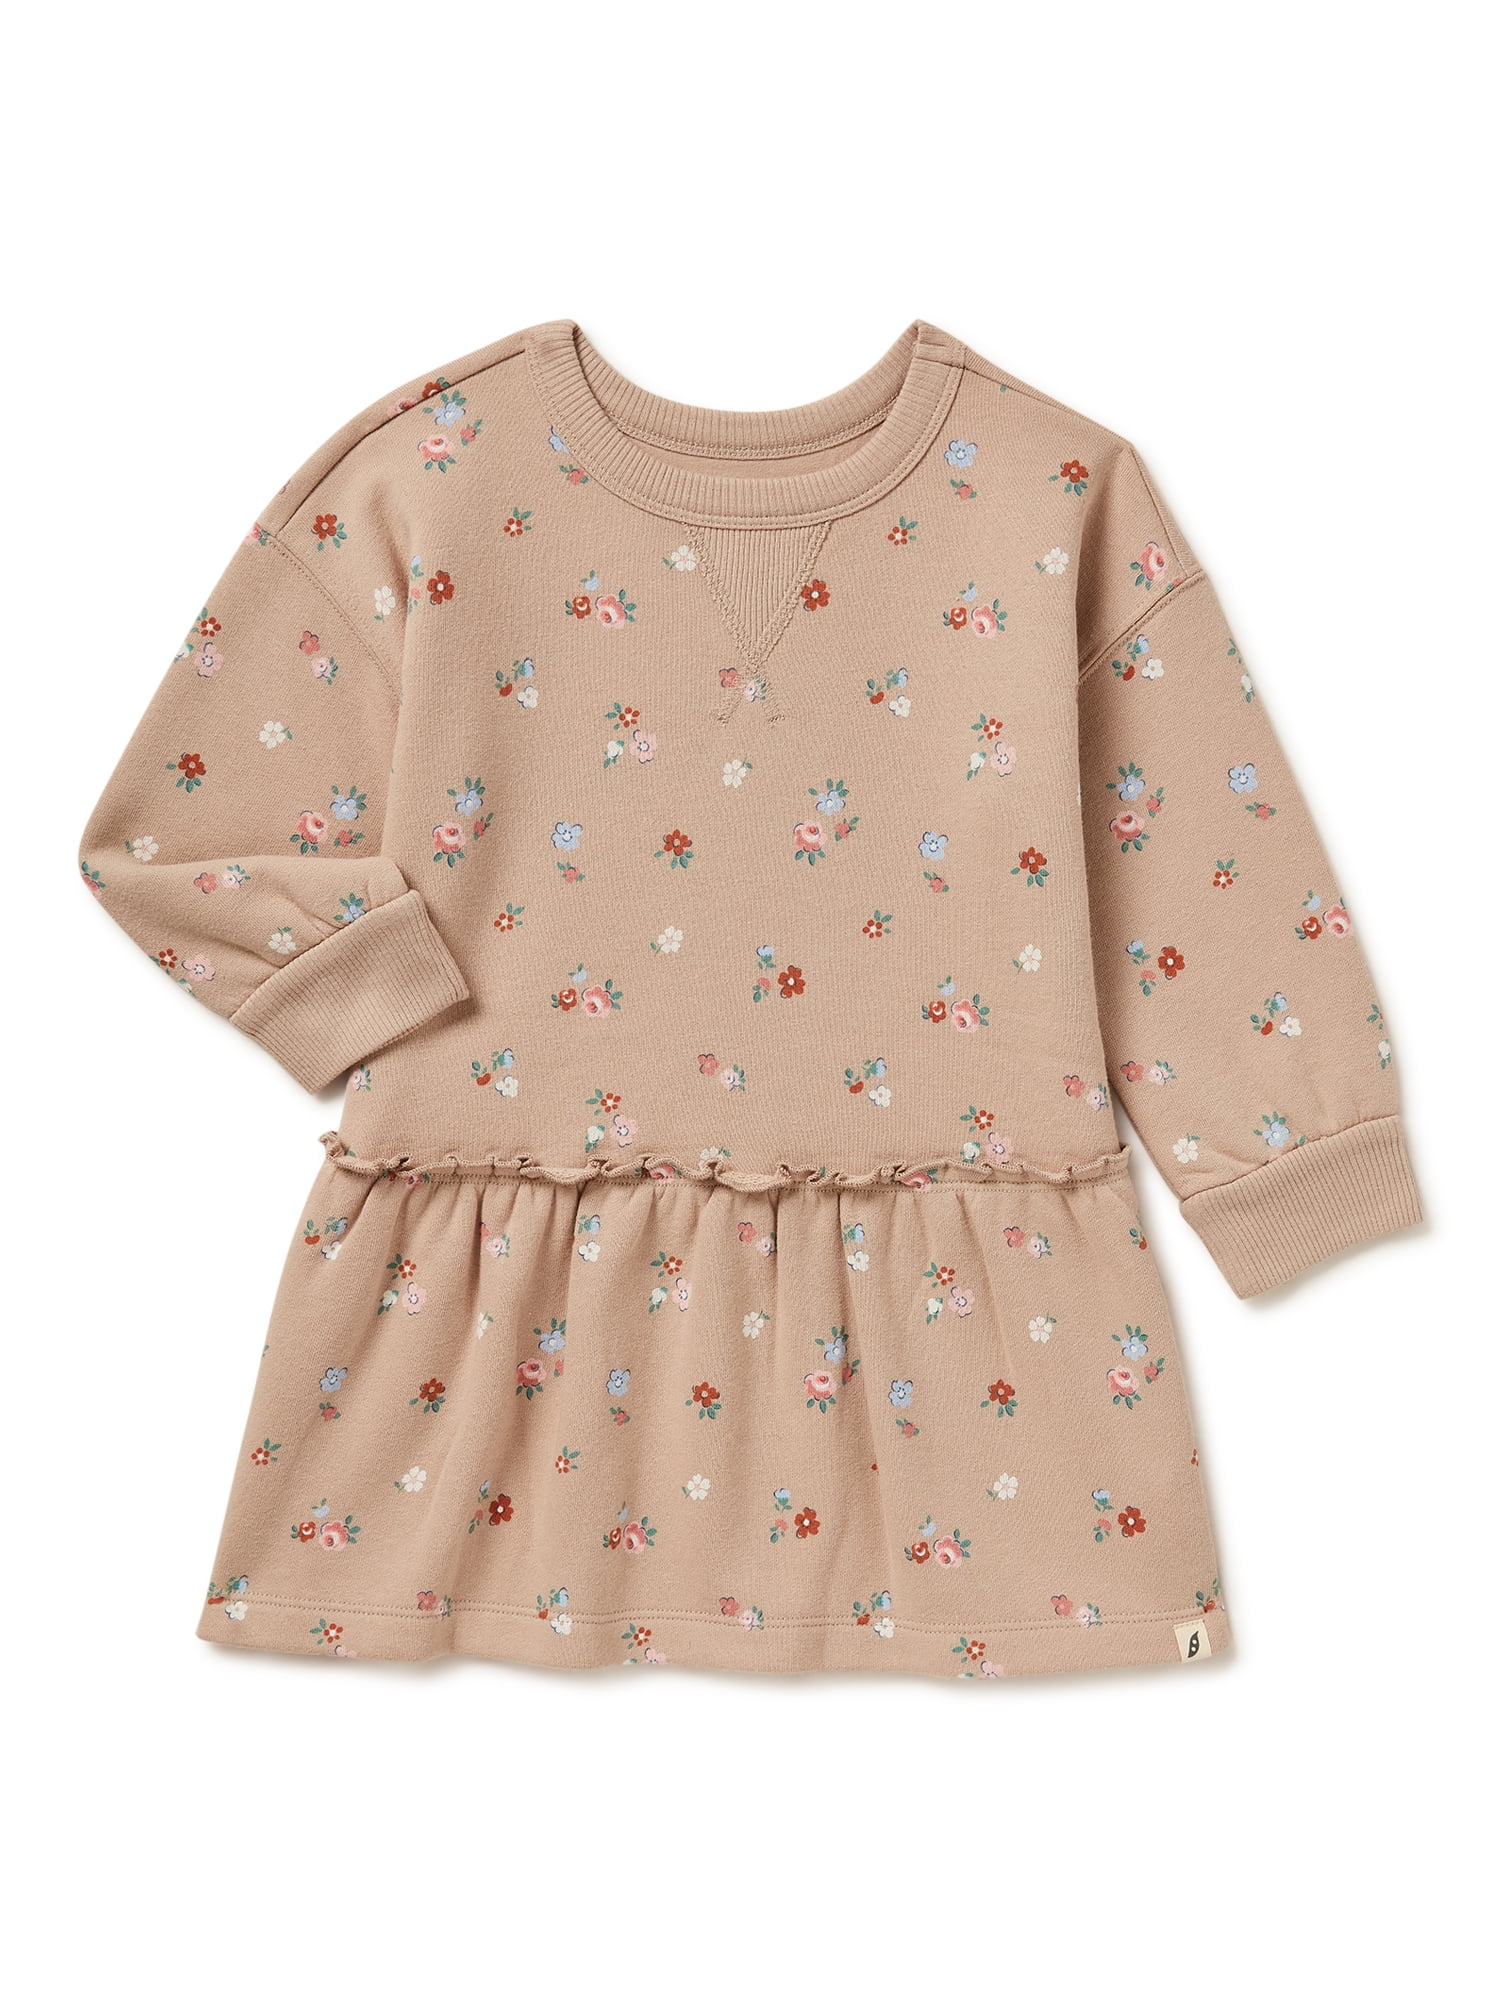 easy-peasy Baby and Toddler Girls' Print Sweatshirt Dress, Sizes 12 Months-5T